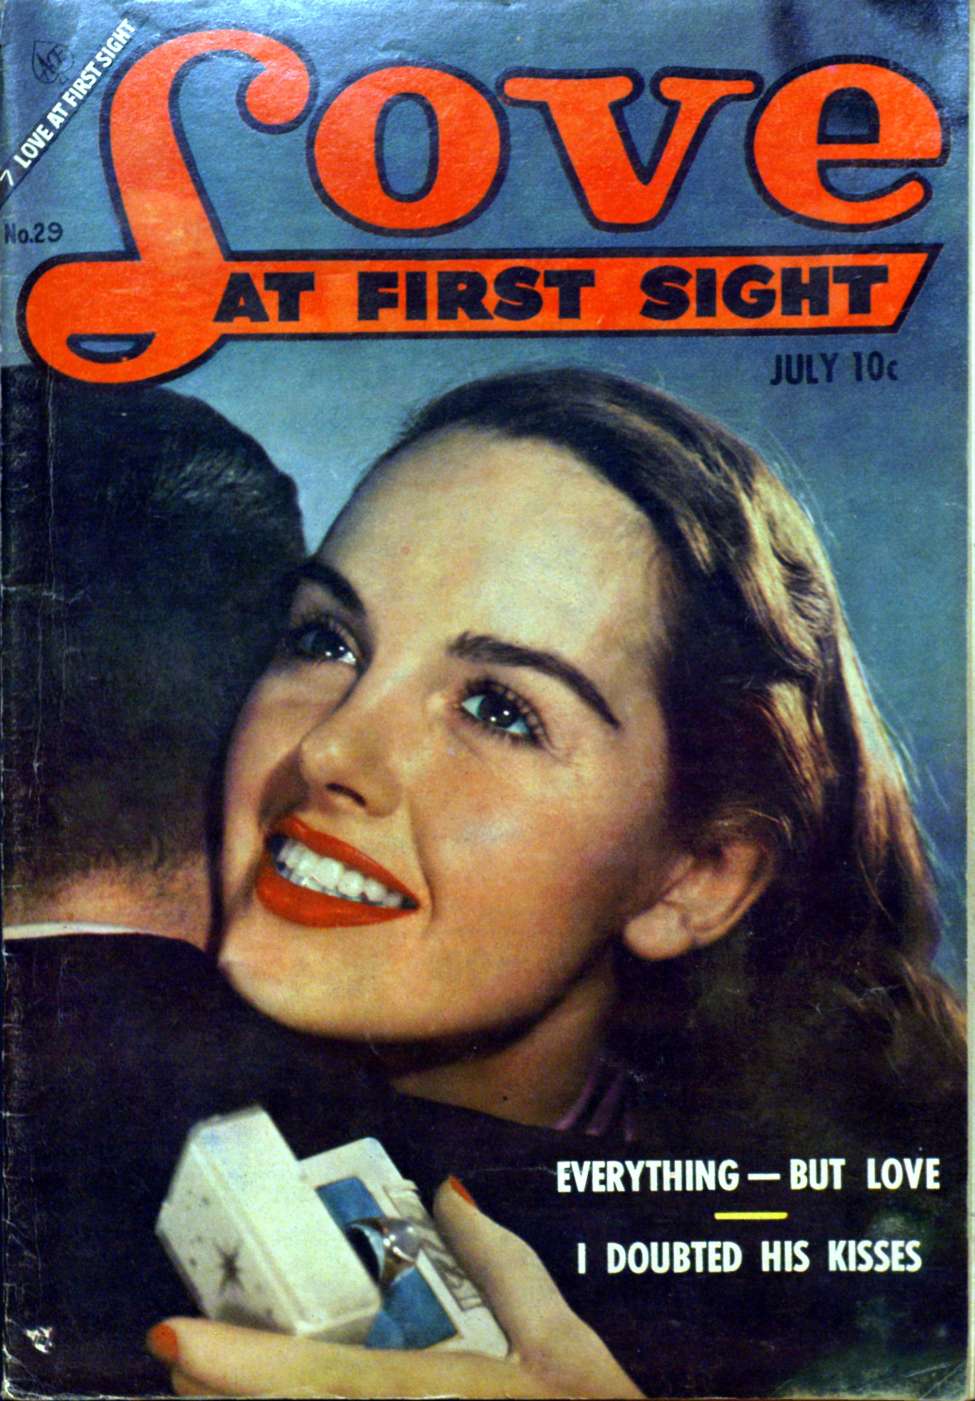 Love at First Sight 29 (Ace Magazines) - Comic Book Plus